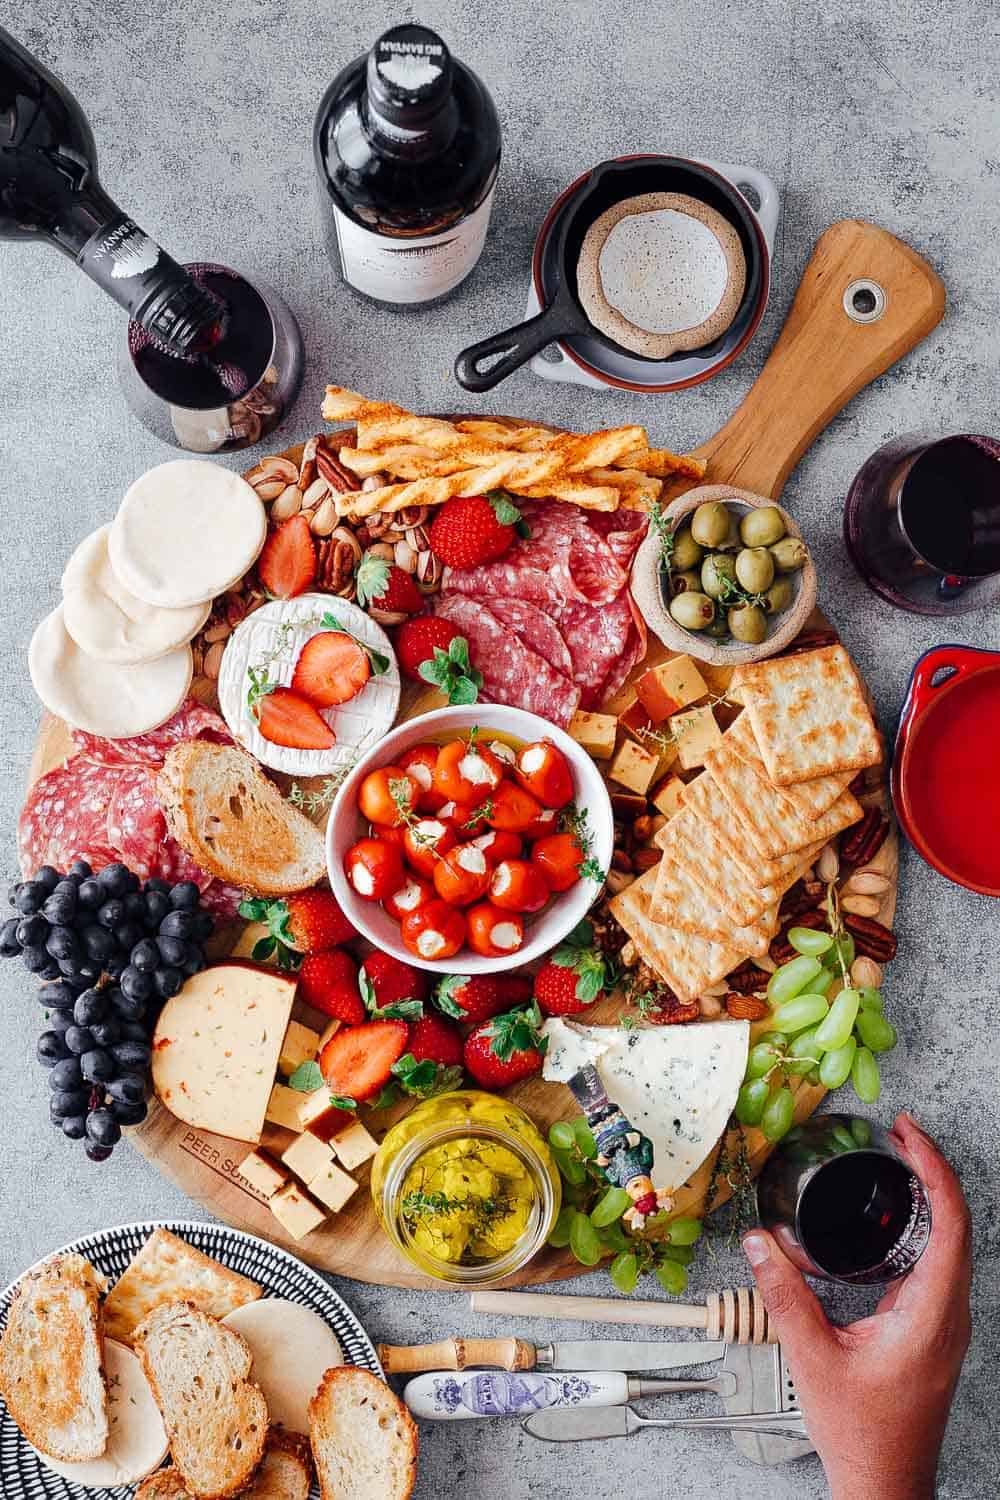 Learn how to make the Ultimate Wine and Cheese Board on a budget with simple tips and tricks. You'll be a DIY cheeseboard ninja by the end of this detailed post. Perfect for Christmas holidays, as a party appetizer for a crowd or for a romantic dinner date.